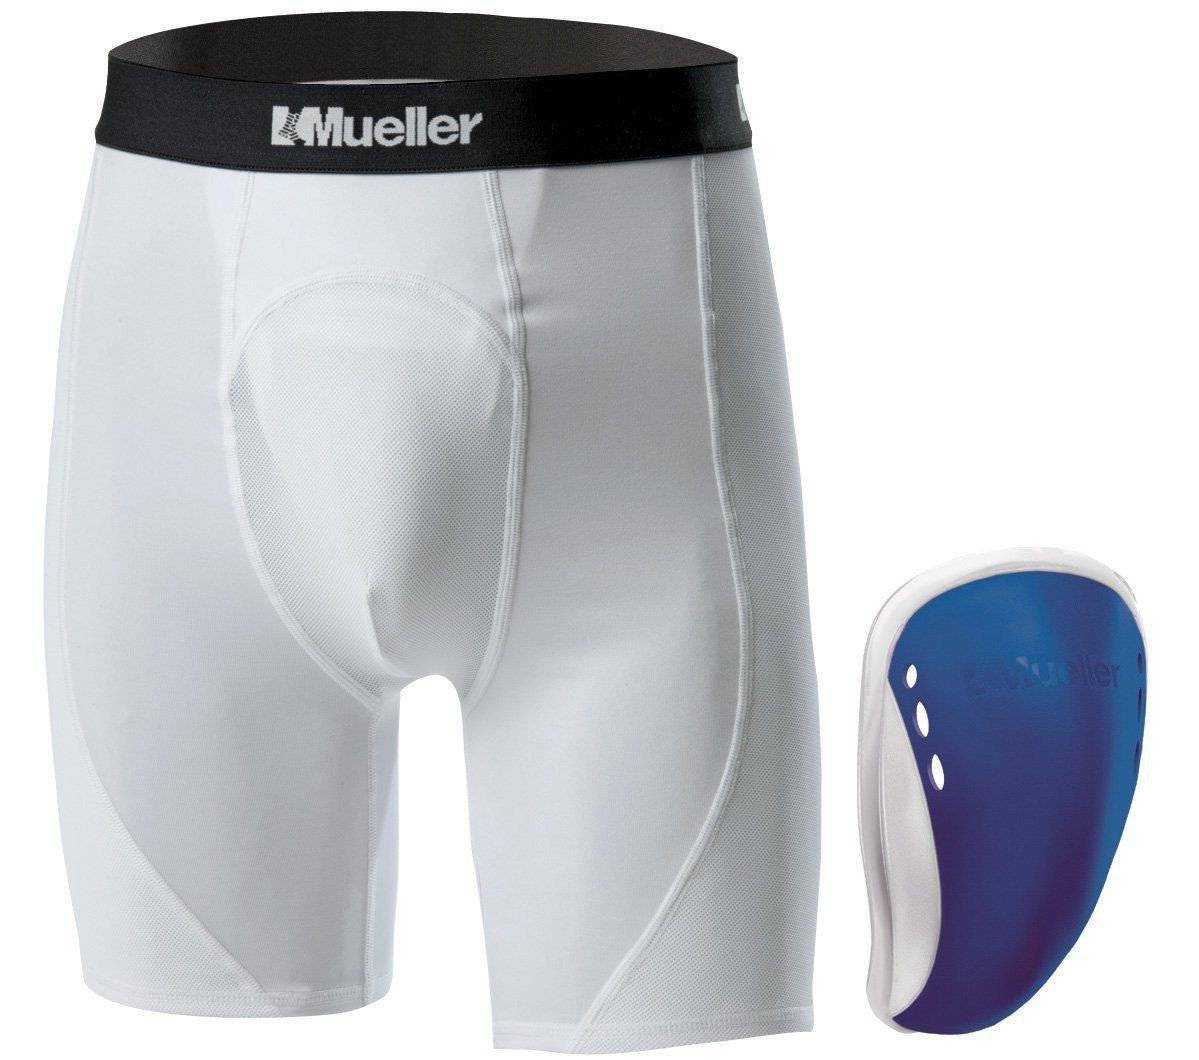 Mueller Youth Athletic Support Brief with Flex Shield Cup - Blue